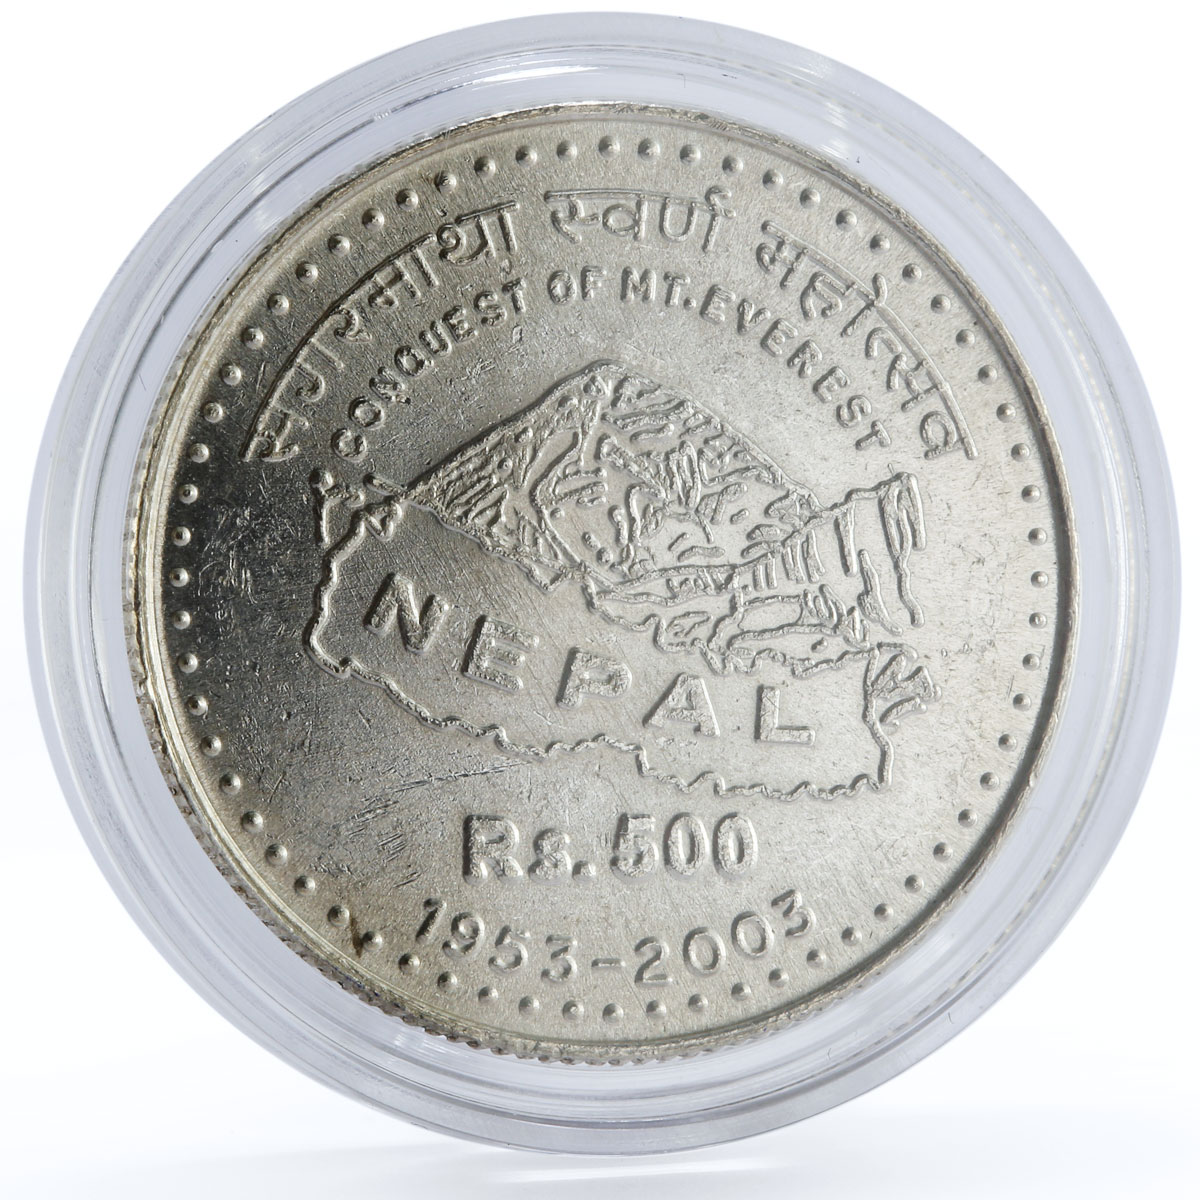 Nepal 500 rupees 50th Anniversary of the Conquest of Everest silver coin 2003